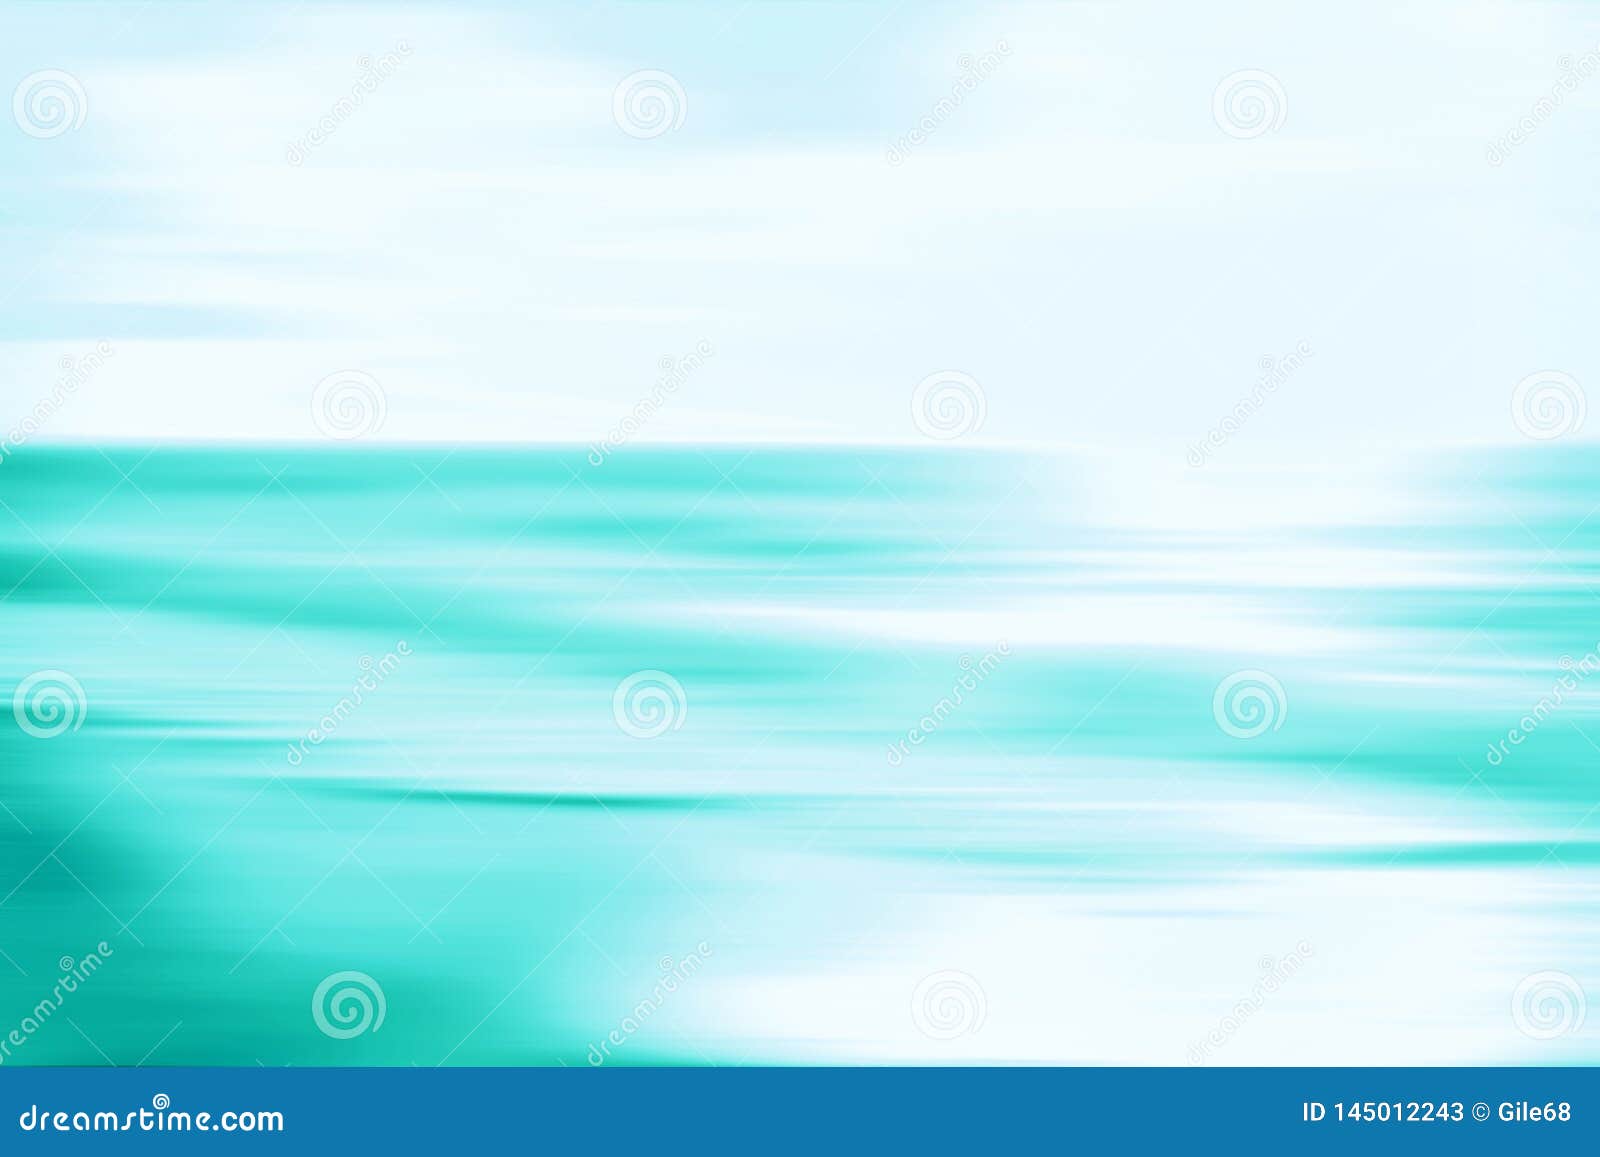 Abstract Sea Blue Background Stock Image - Image of blur, colors: 145012243